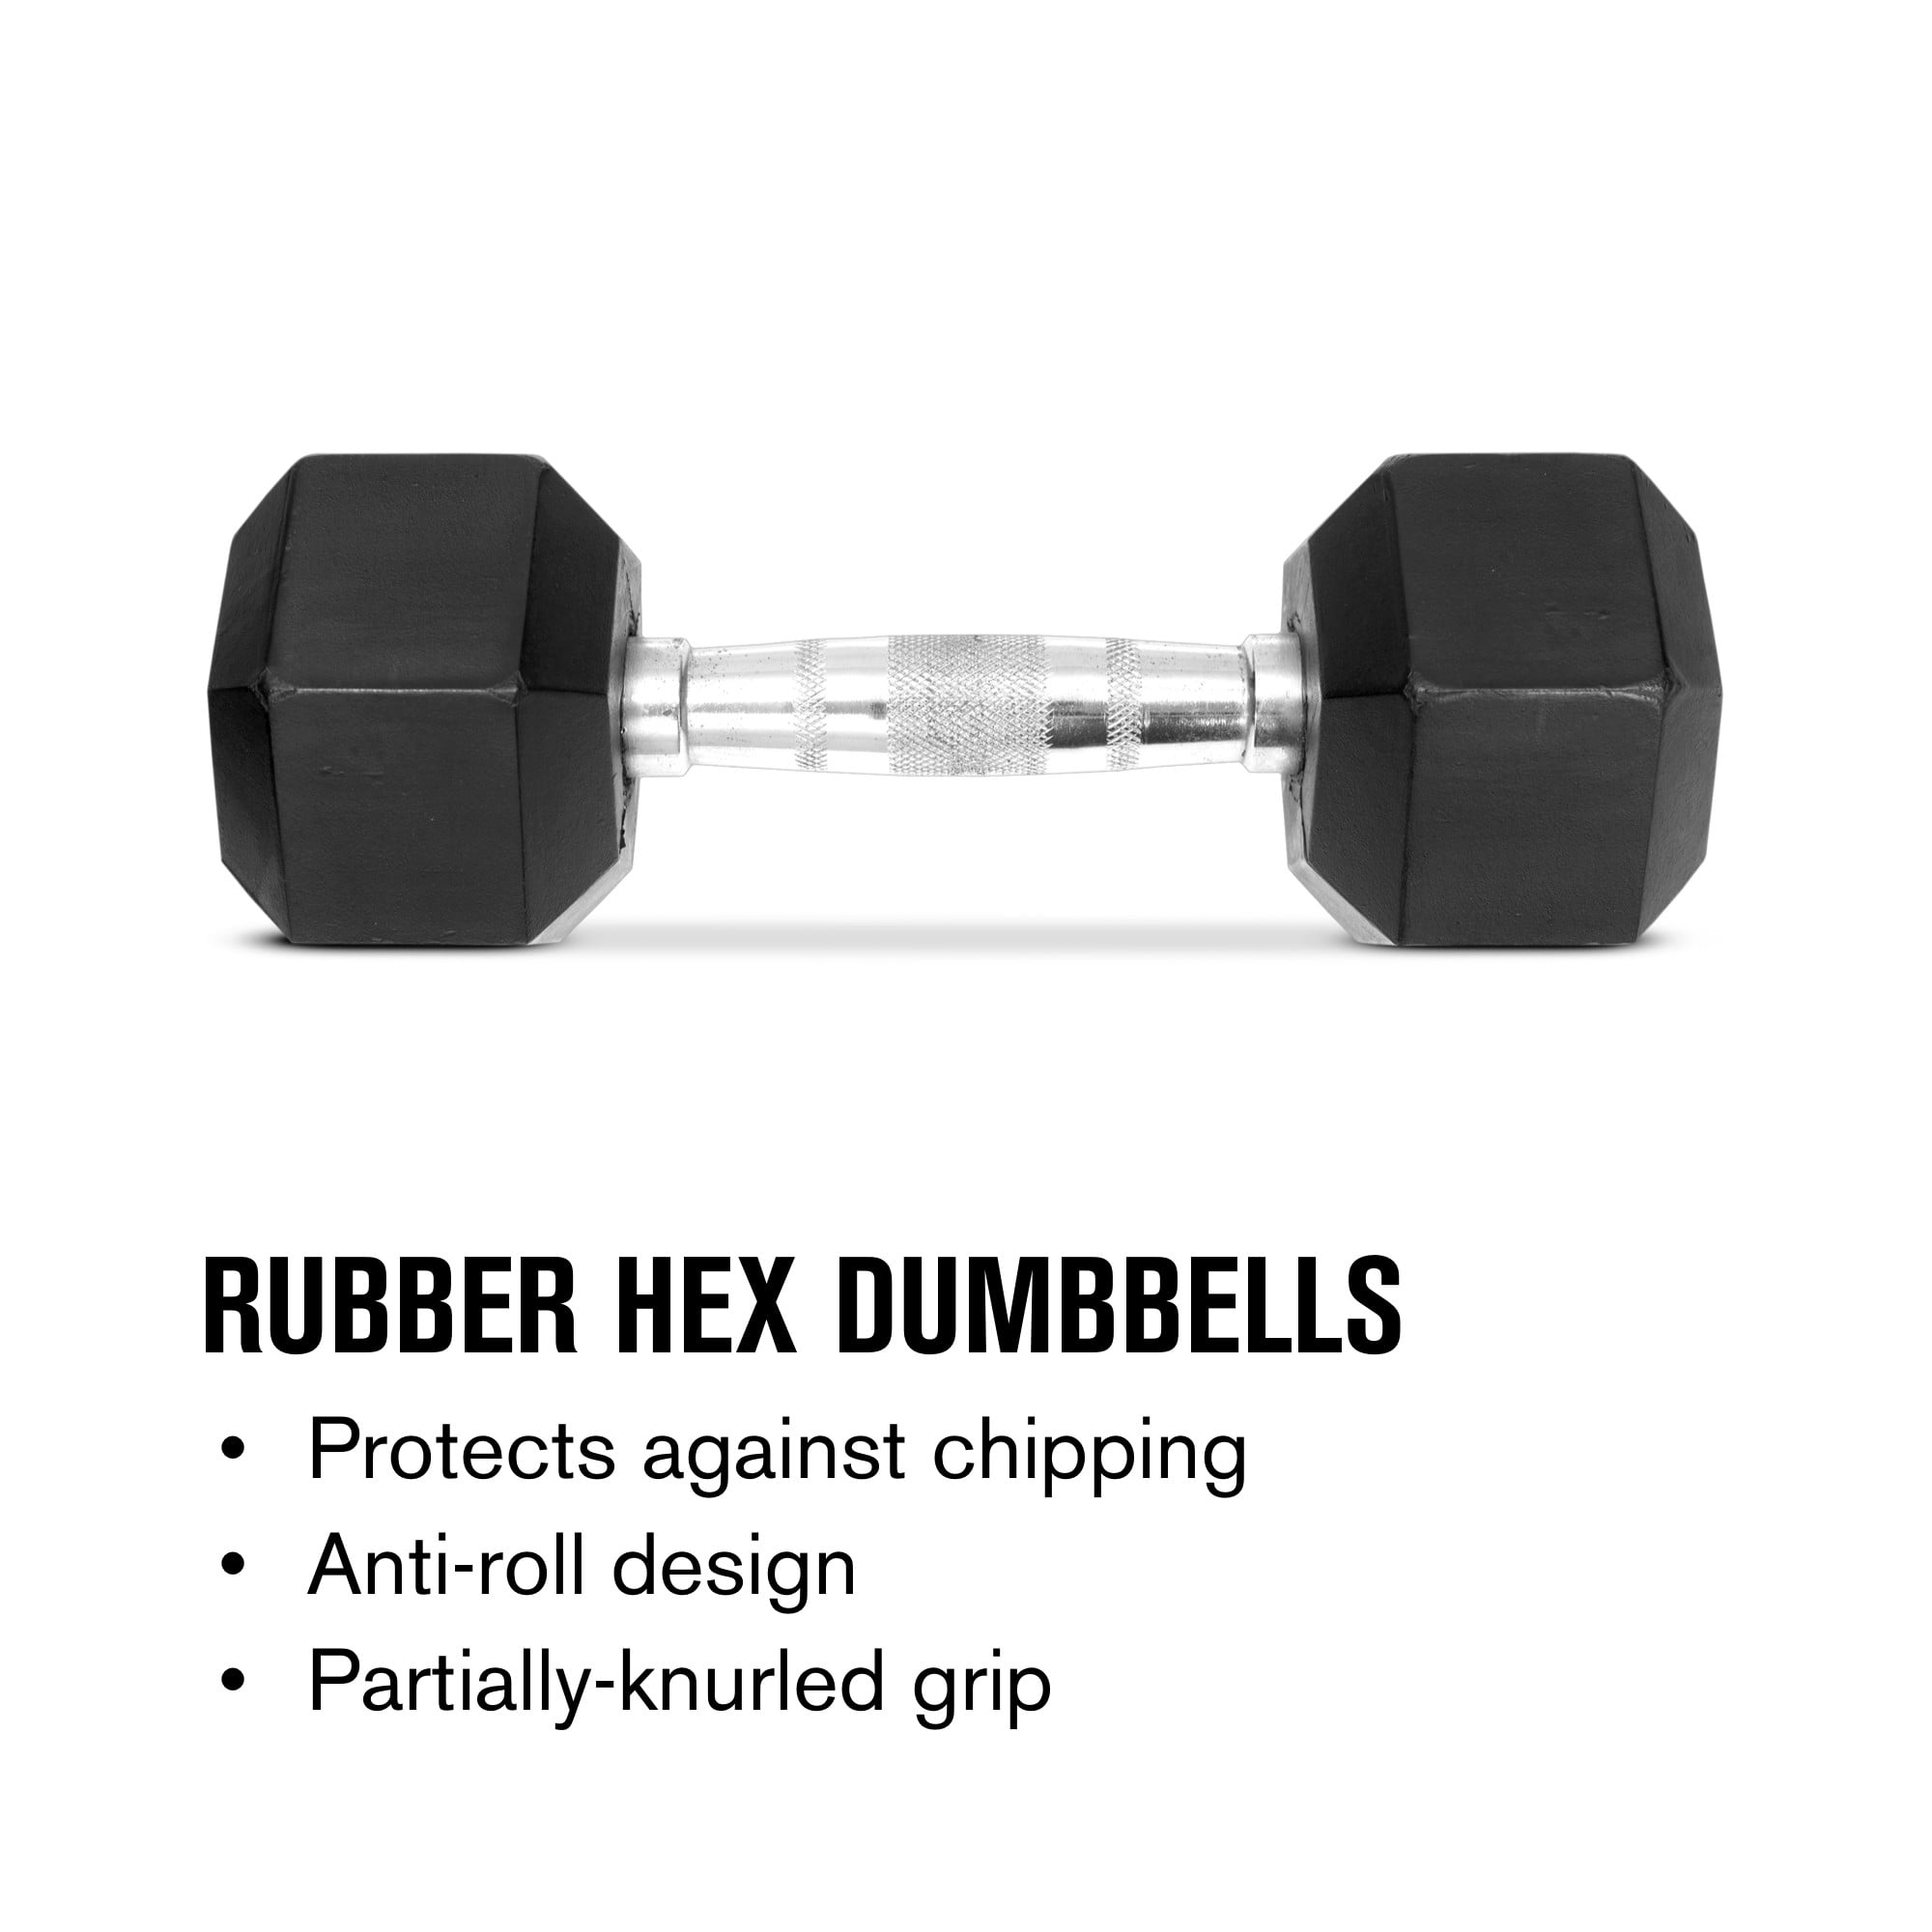 Weider 15 lb Dumbbells Pair Set Rubber Hex 30 Pounds Total Fast Shipping 